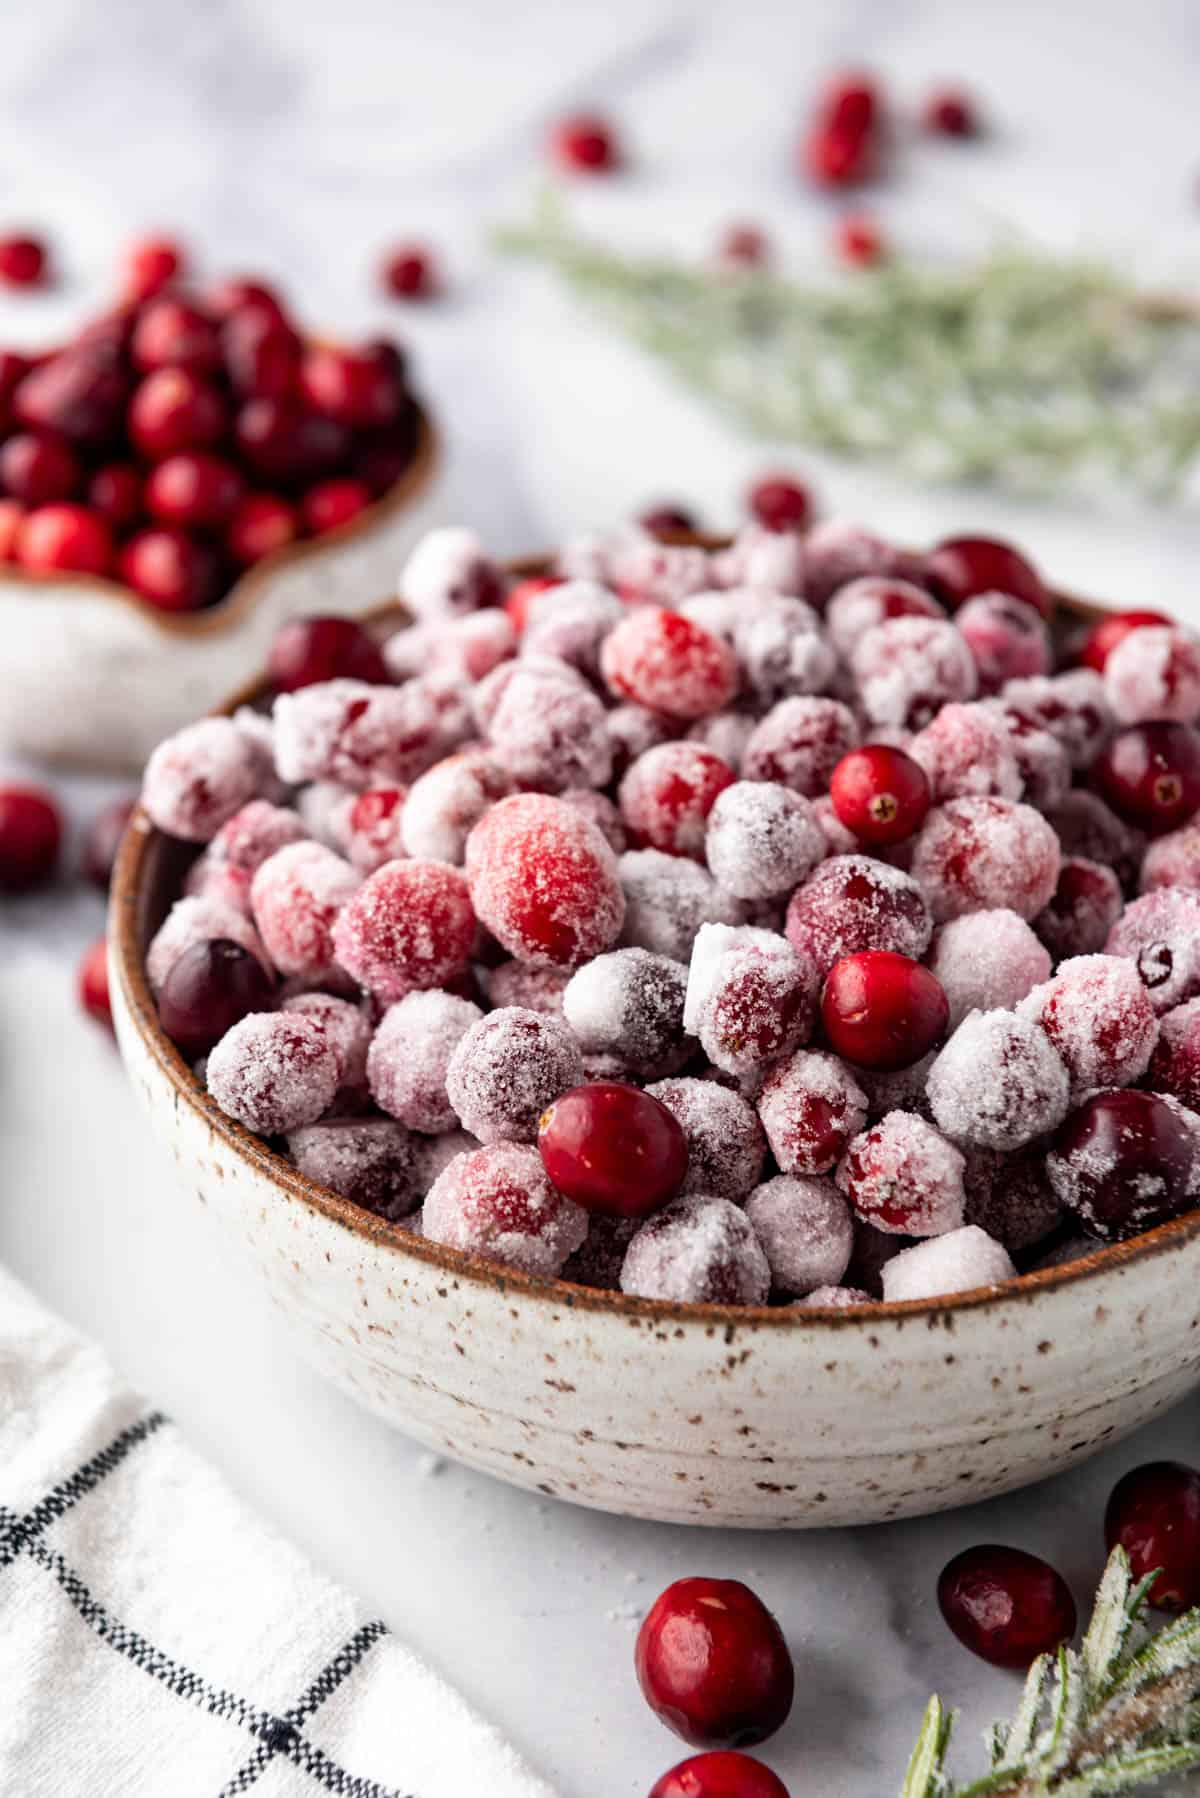 A bowl of candied cranberries.